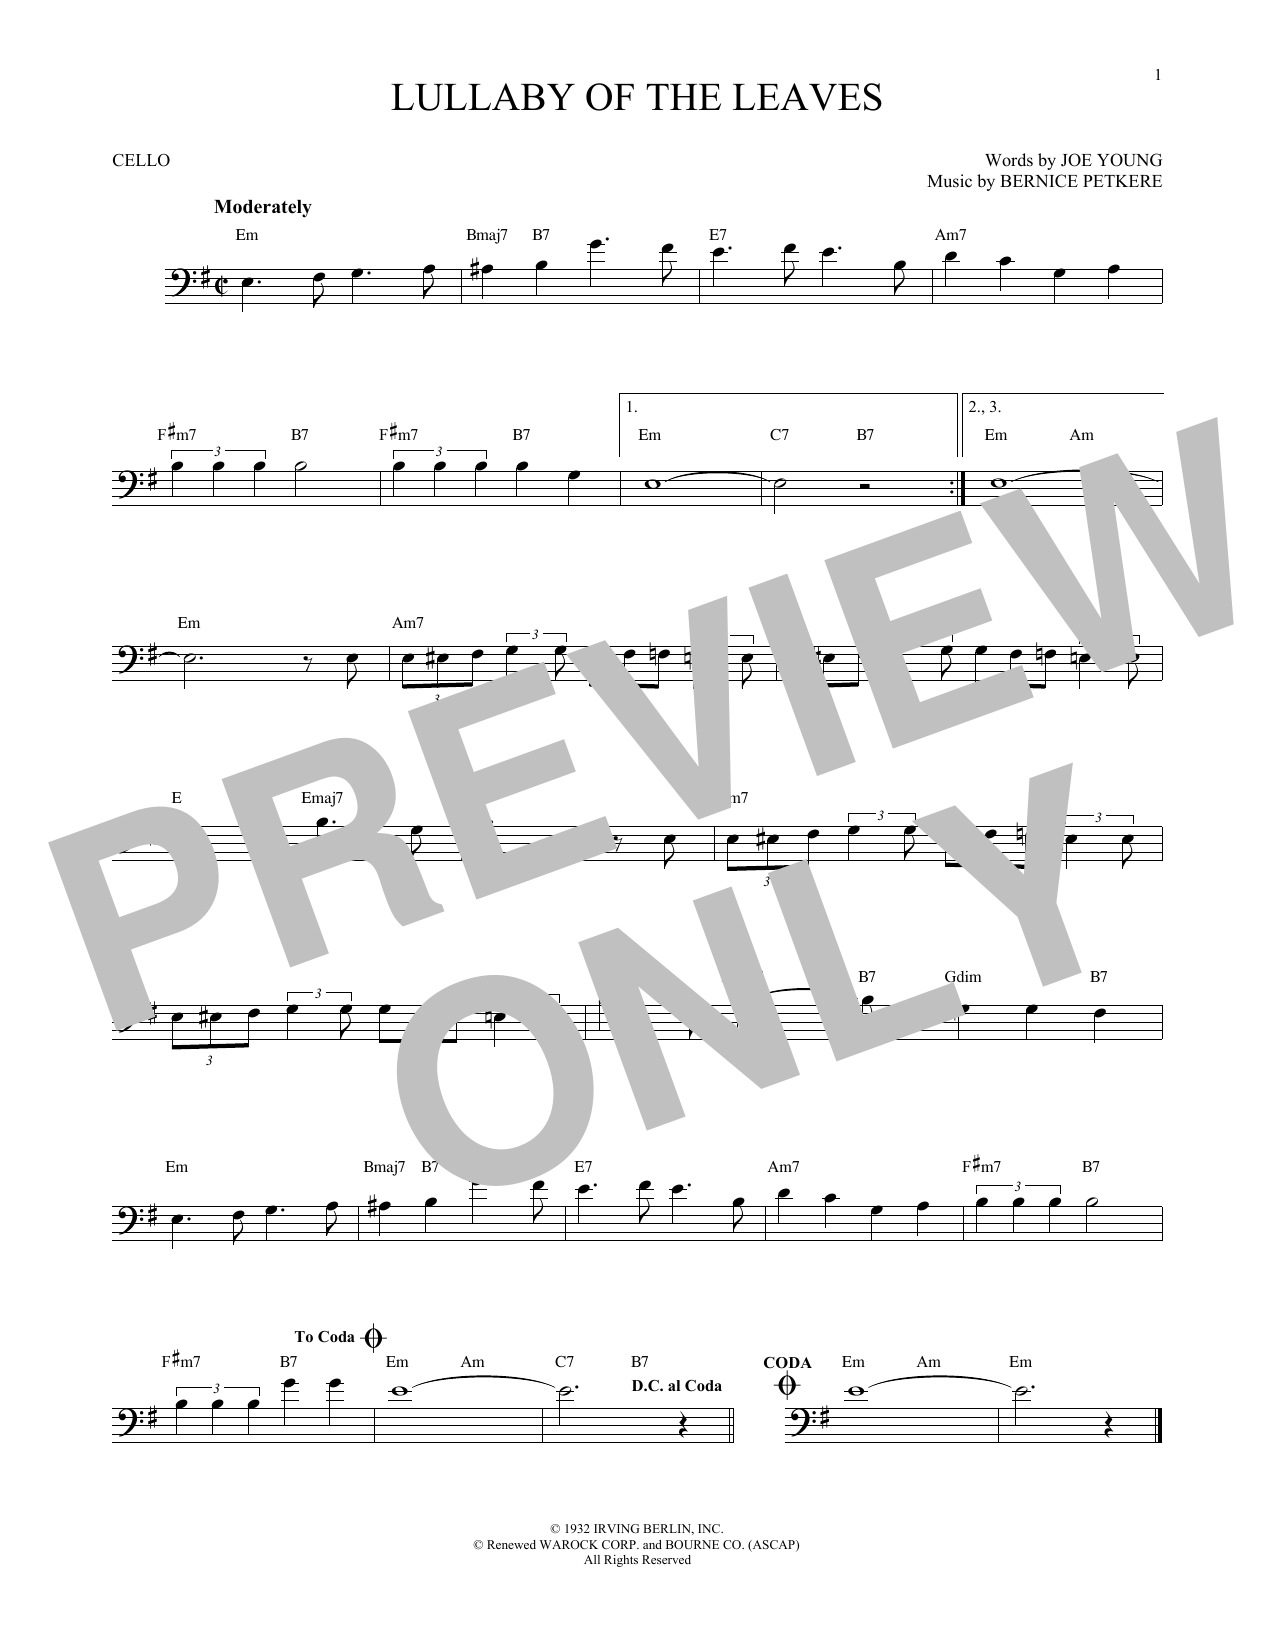 Download Bernice Petkere Lullaby Of The Leaves Sheet Music